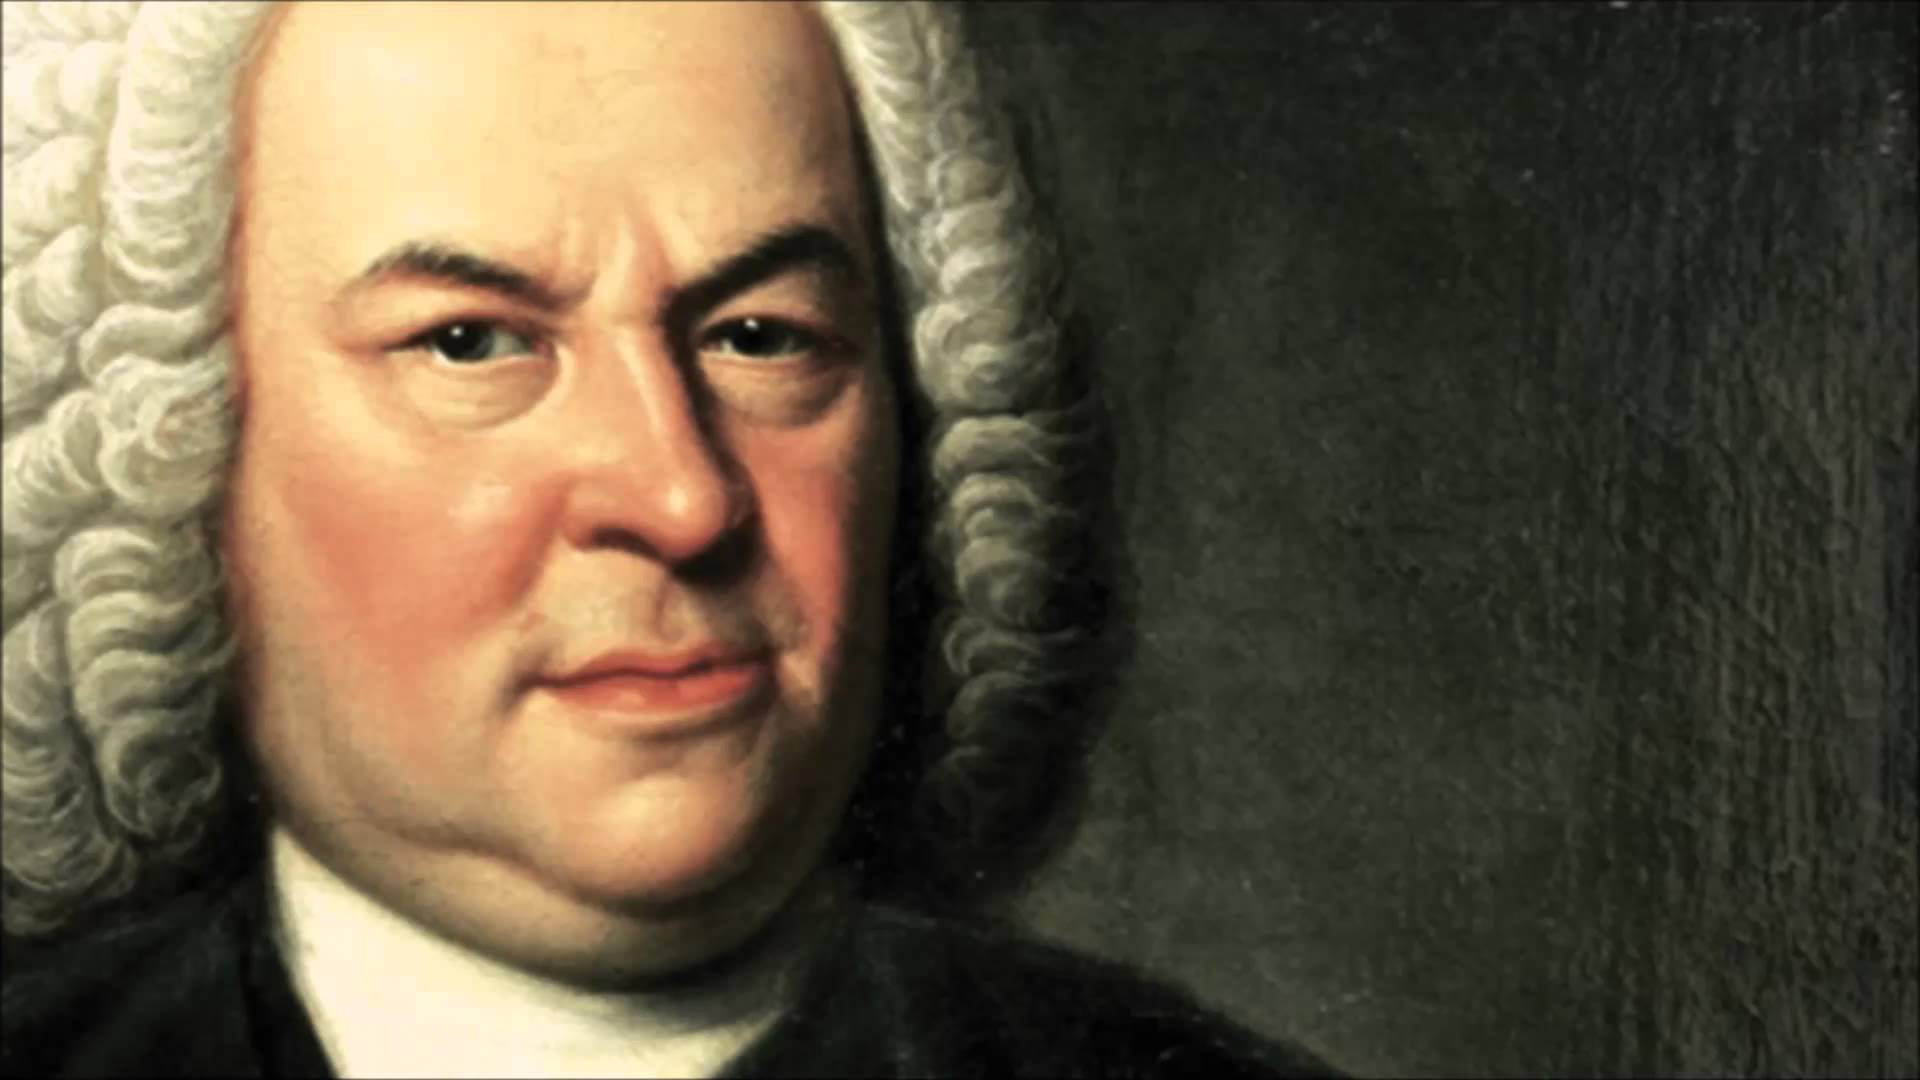 It's Time to Bach Around the Clock. The Toledo Museum of Art